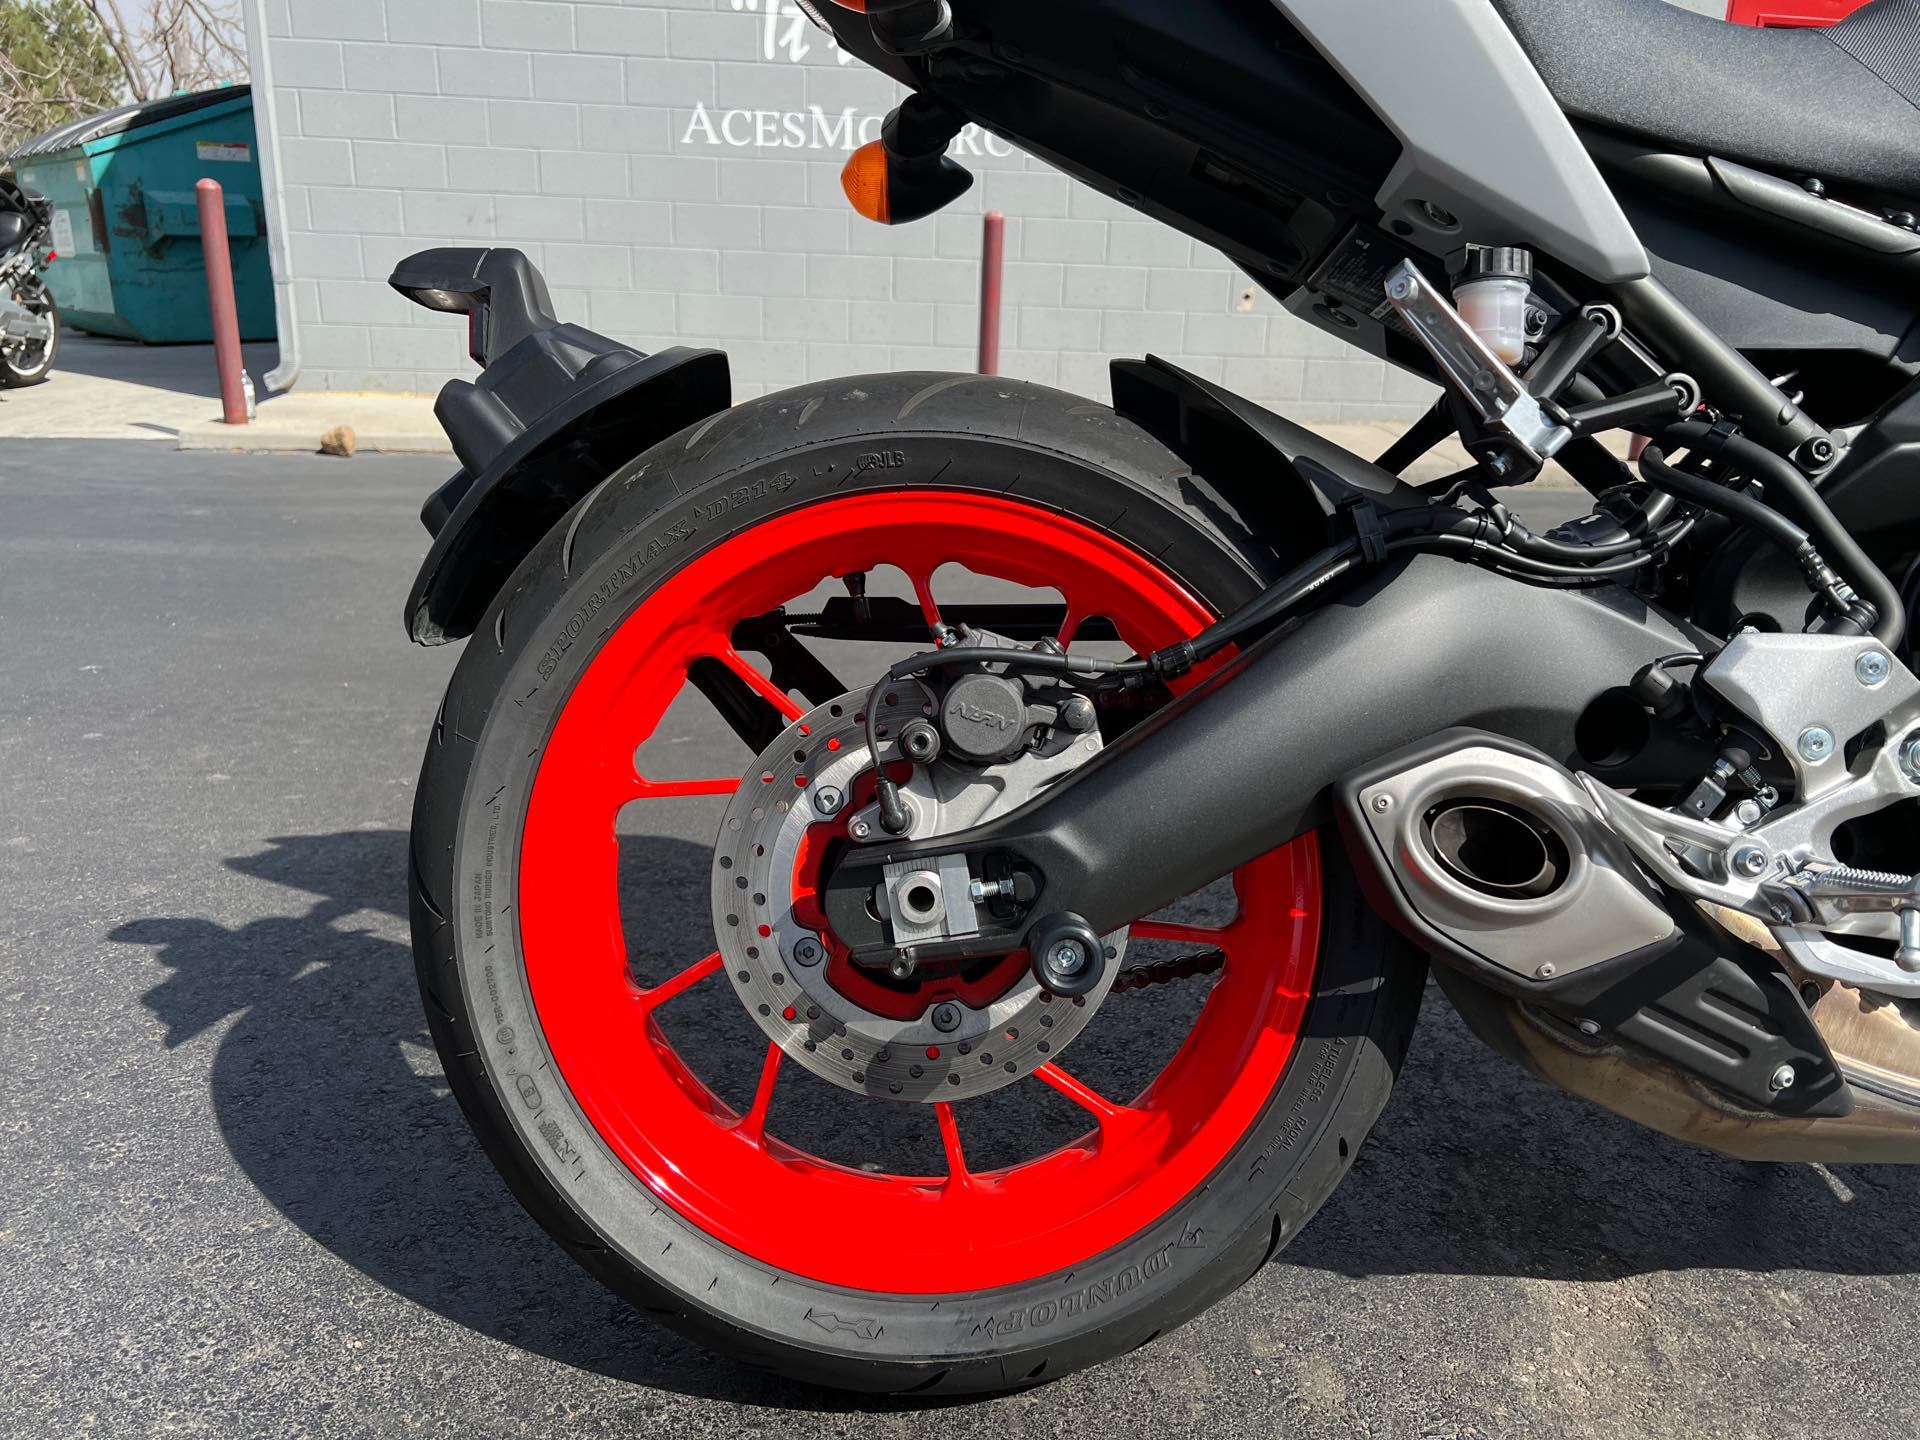 2019 Yamaha MT 09 at Aces Motorcycles - Fort Collins